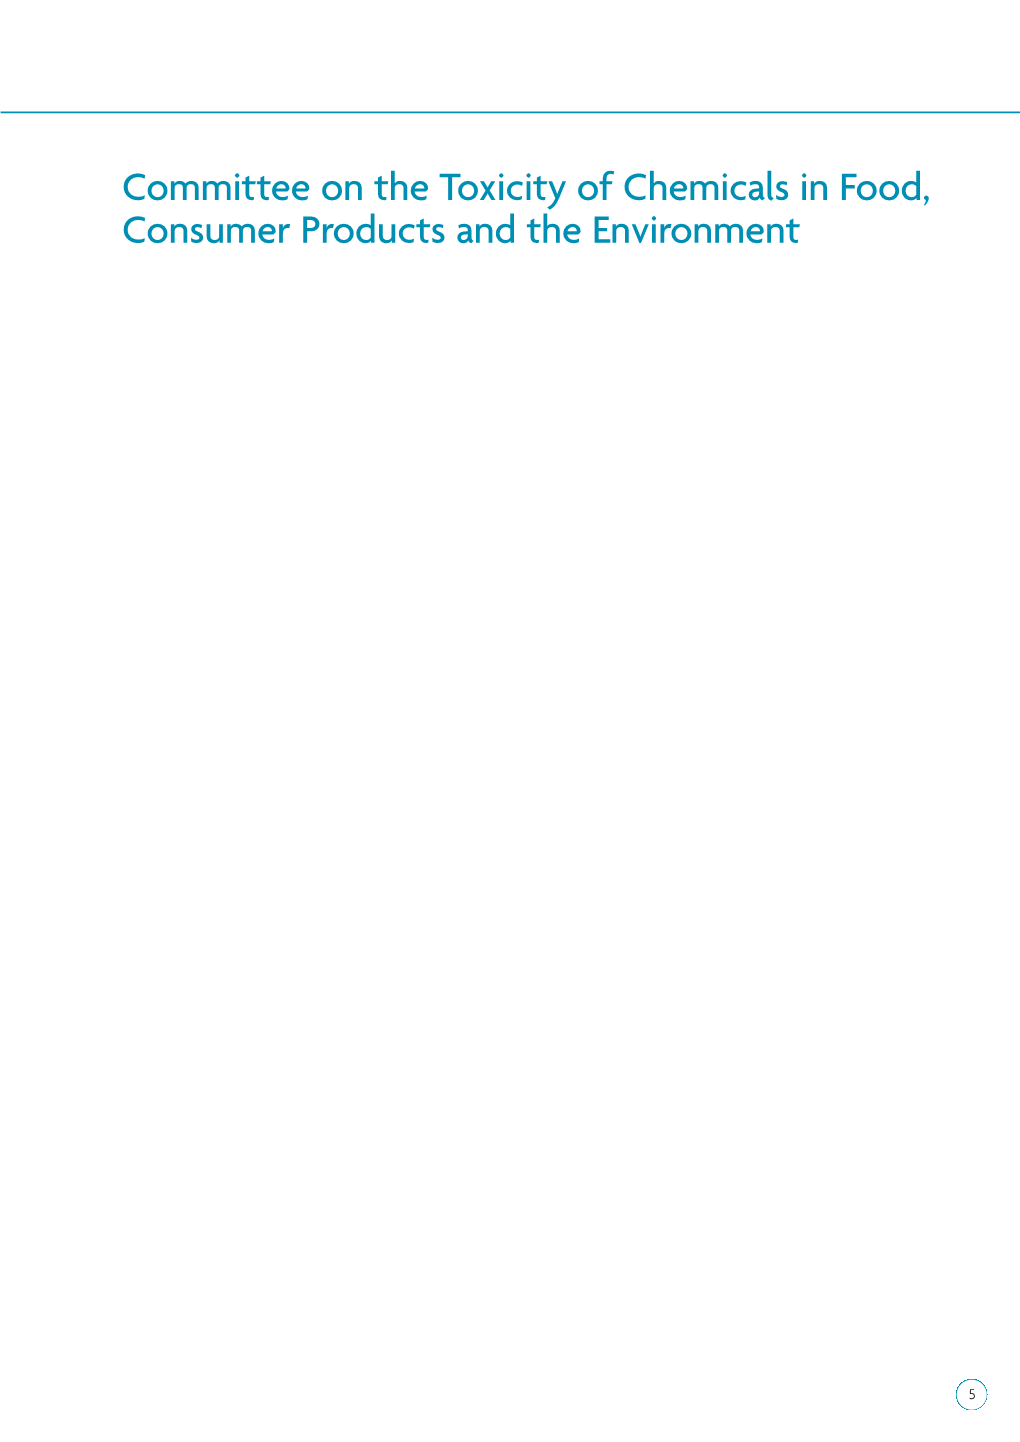 Committee on the Toxicity of Chemicals in Food, Consumer Products and the Environment